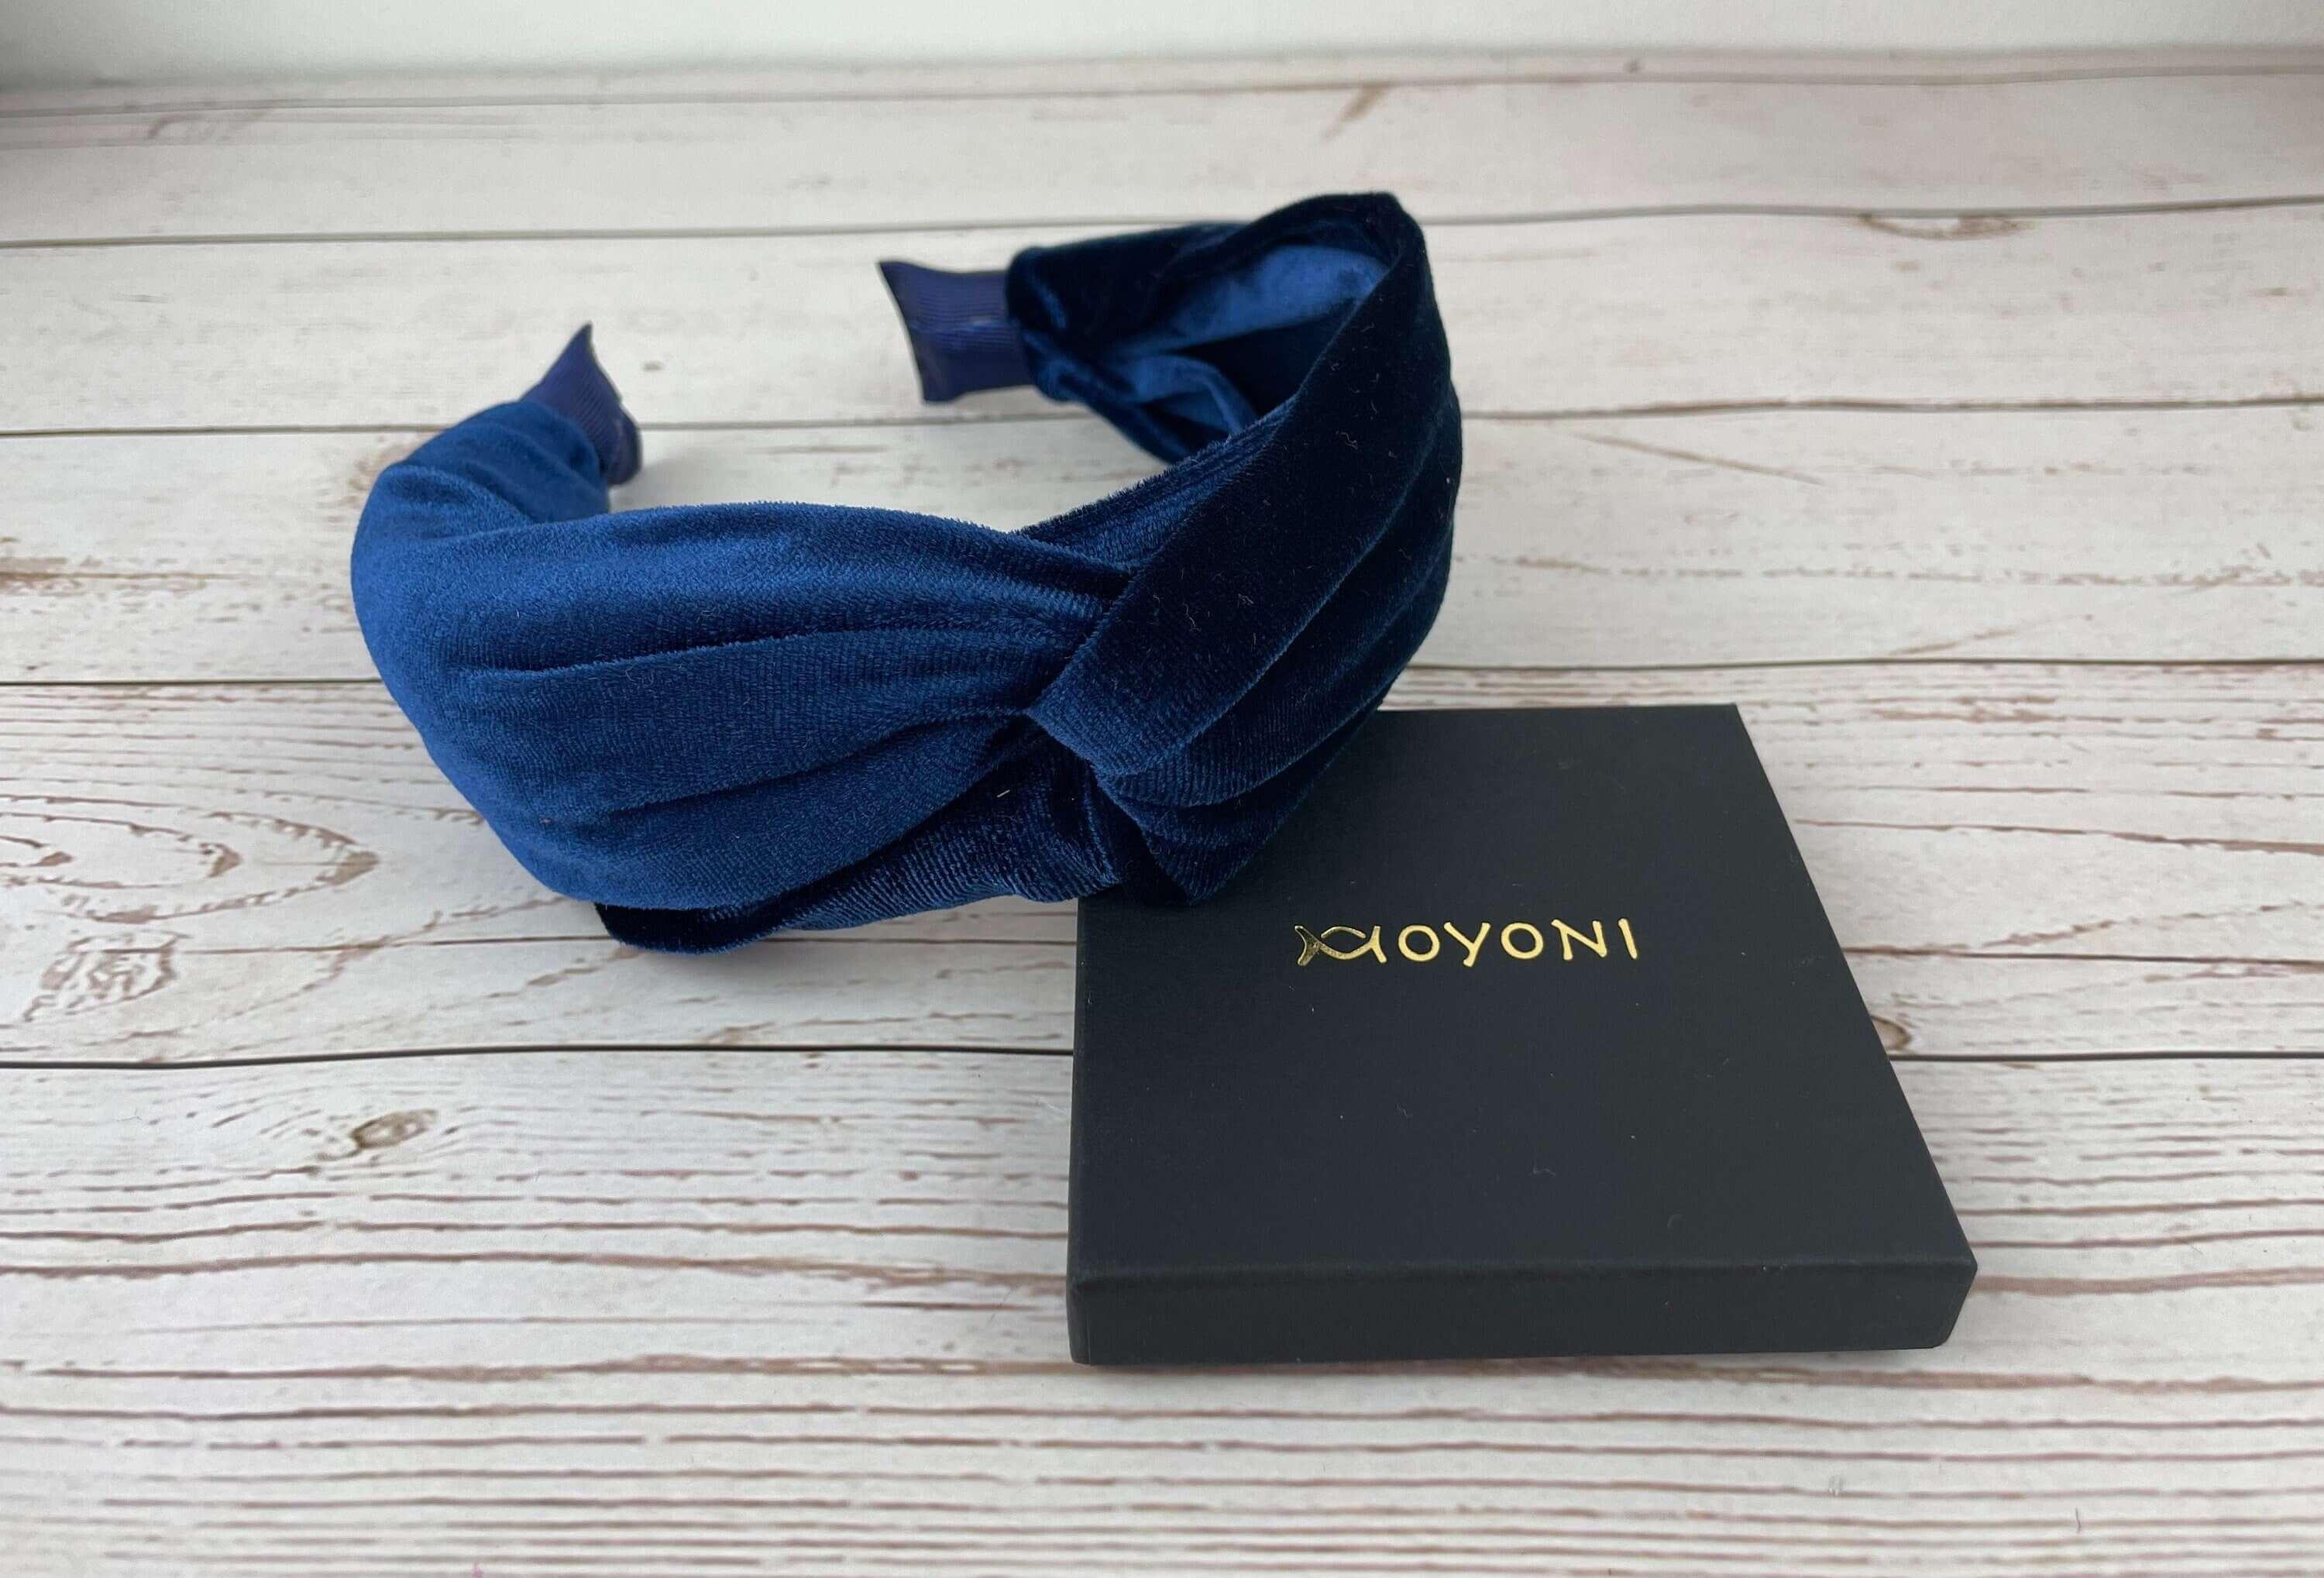 Charming Parliament Blue Knotted Velvet Headband - Handmade Dark Navy Hairband for Women, Fashionable and Comfortable Accessory without Padding available at Moyoni Design